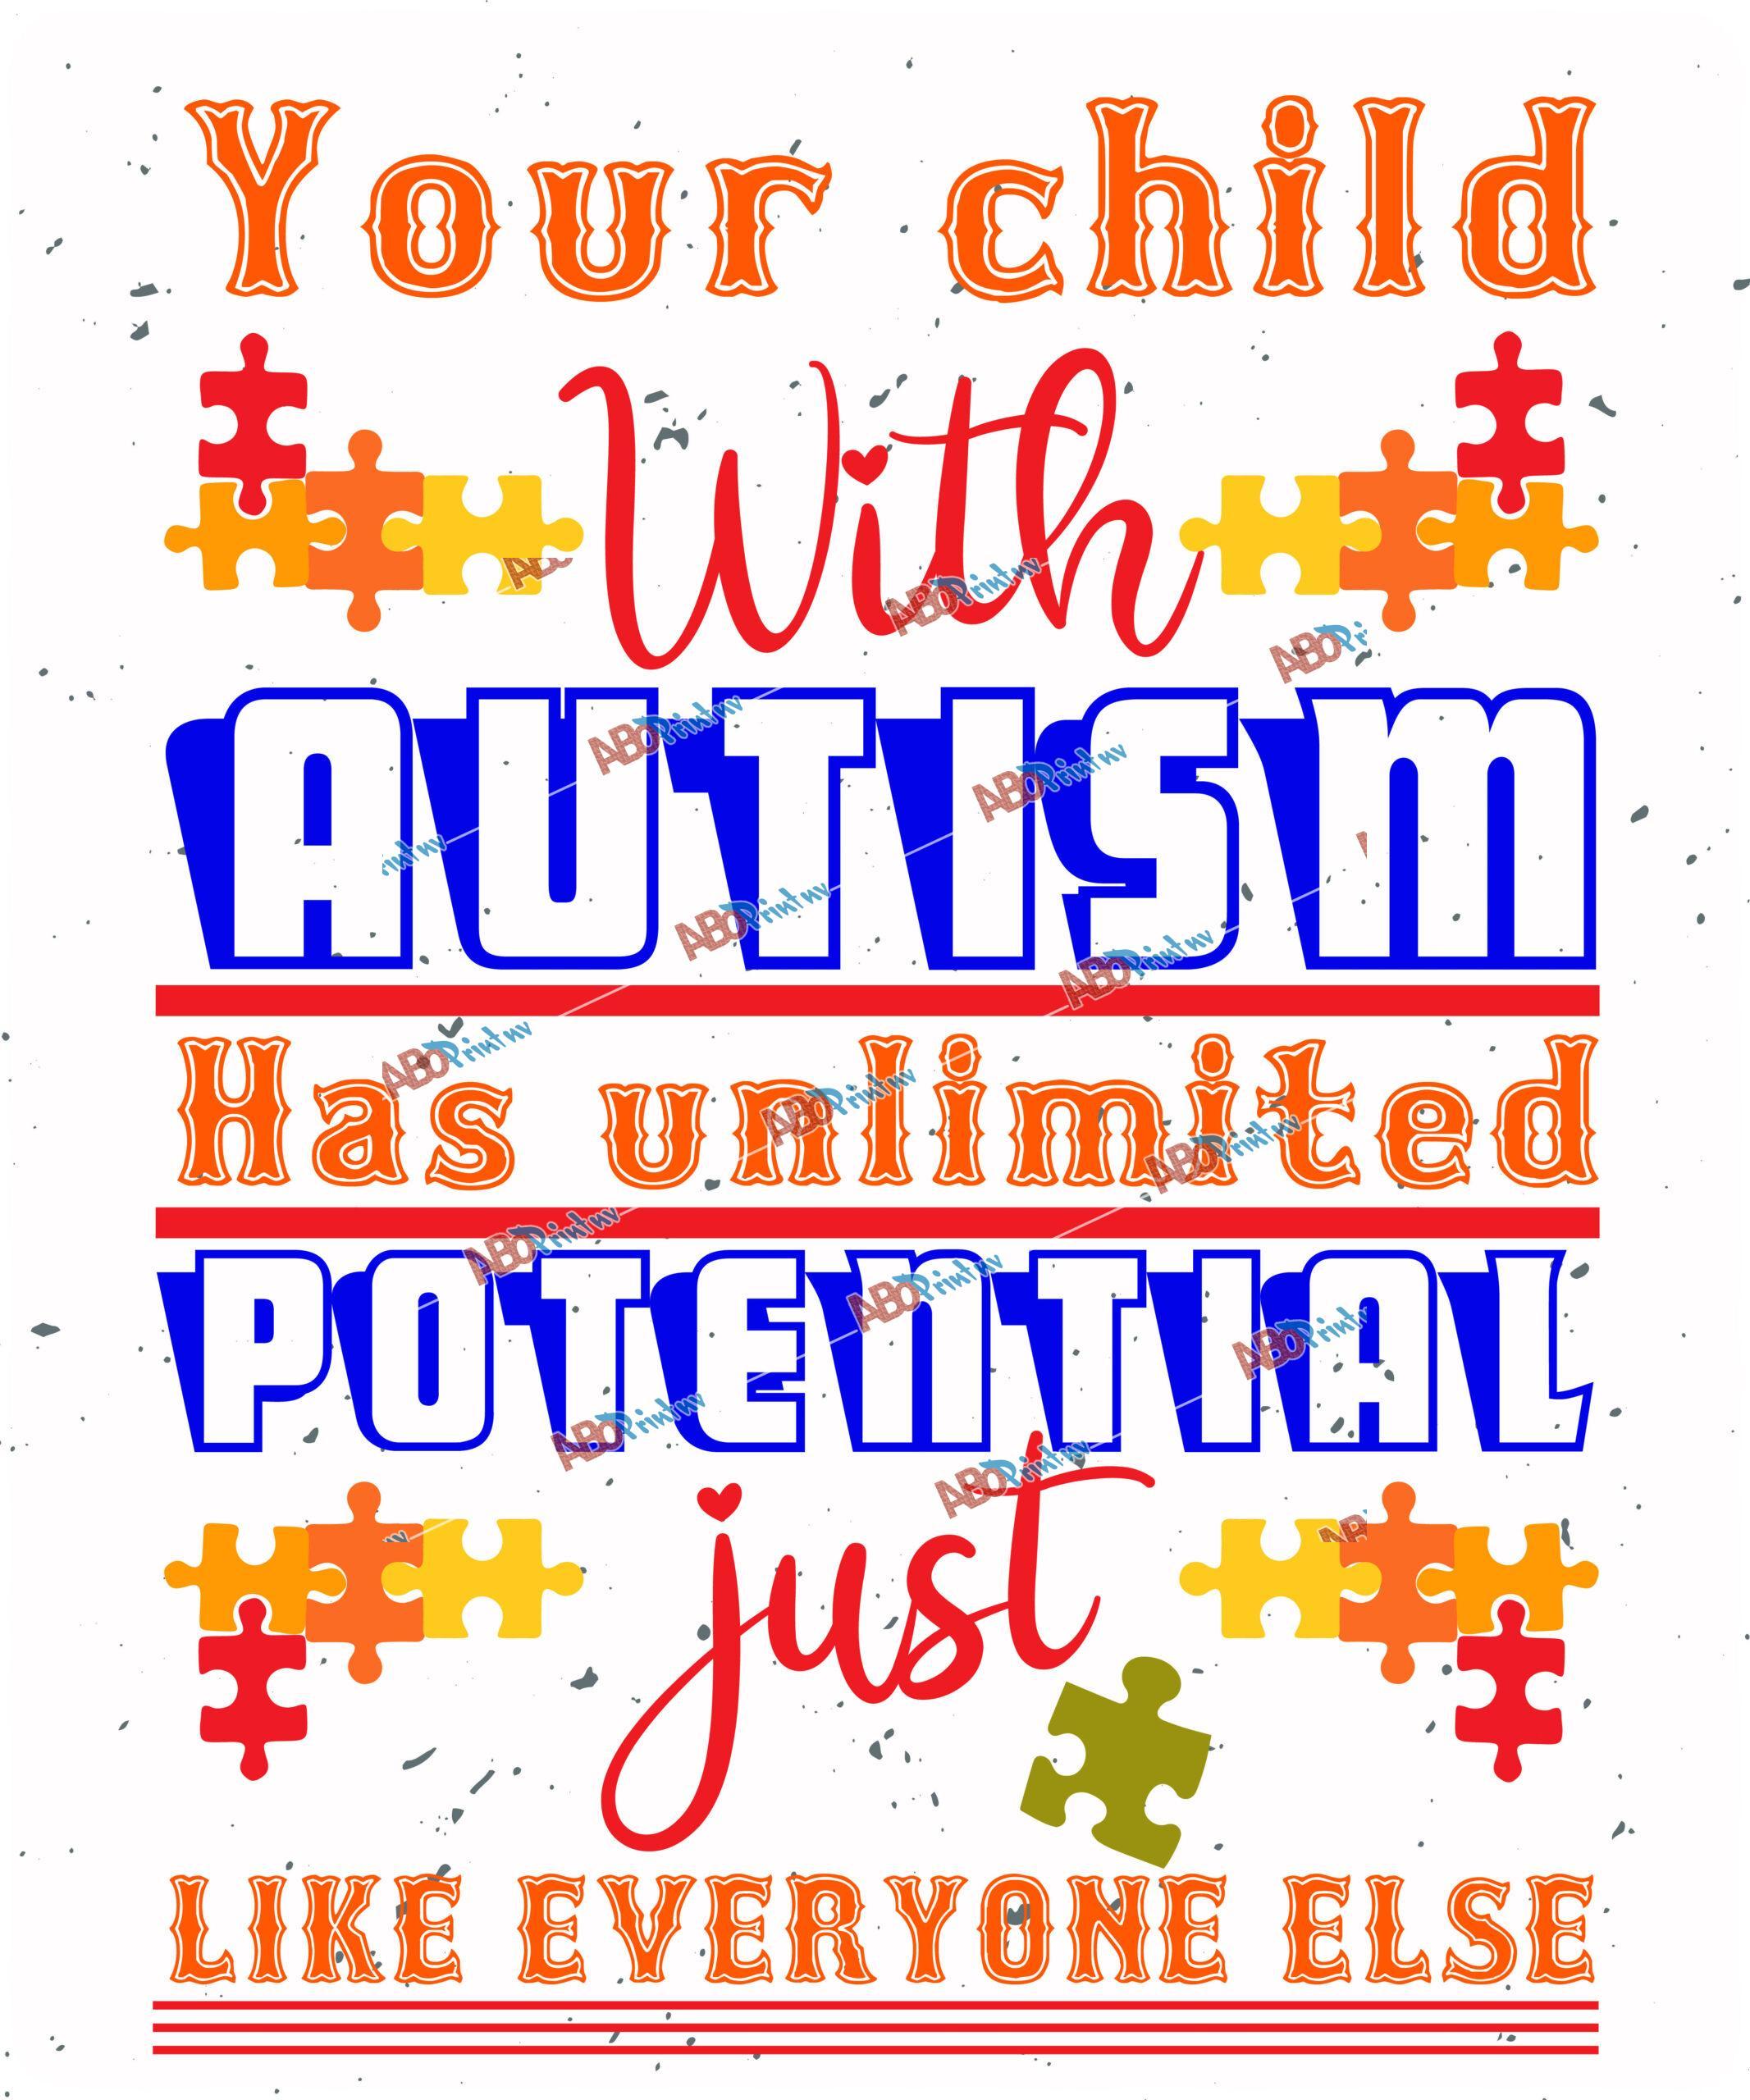 Your child with autism has unlimited